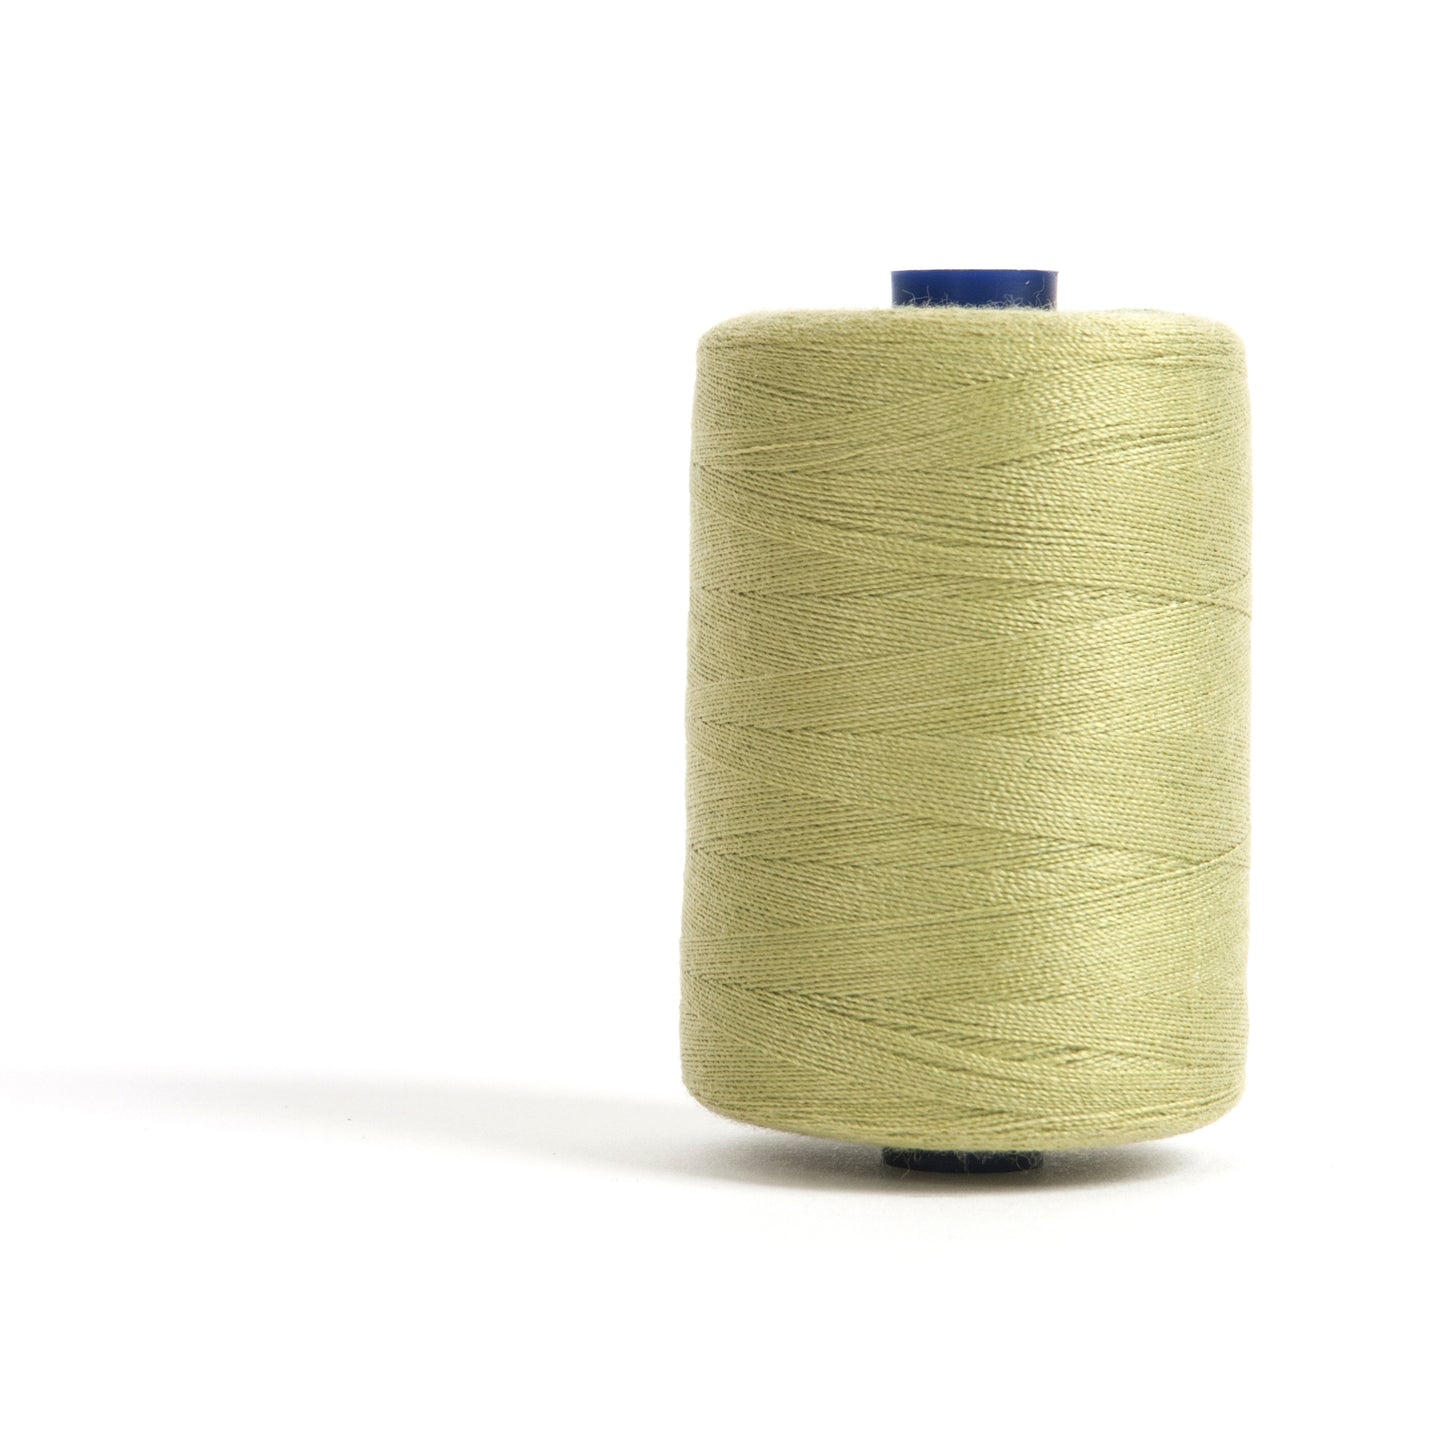 Sewing and Overlocking Thread: 1,000m: Grass